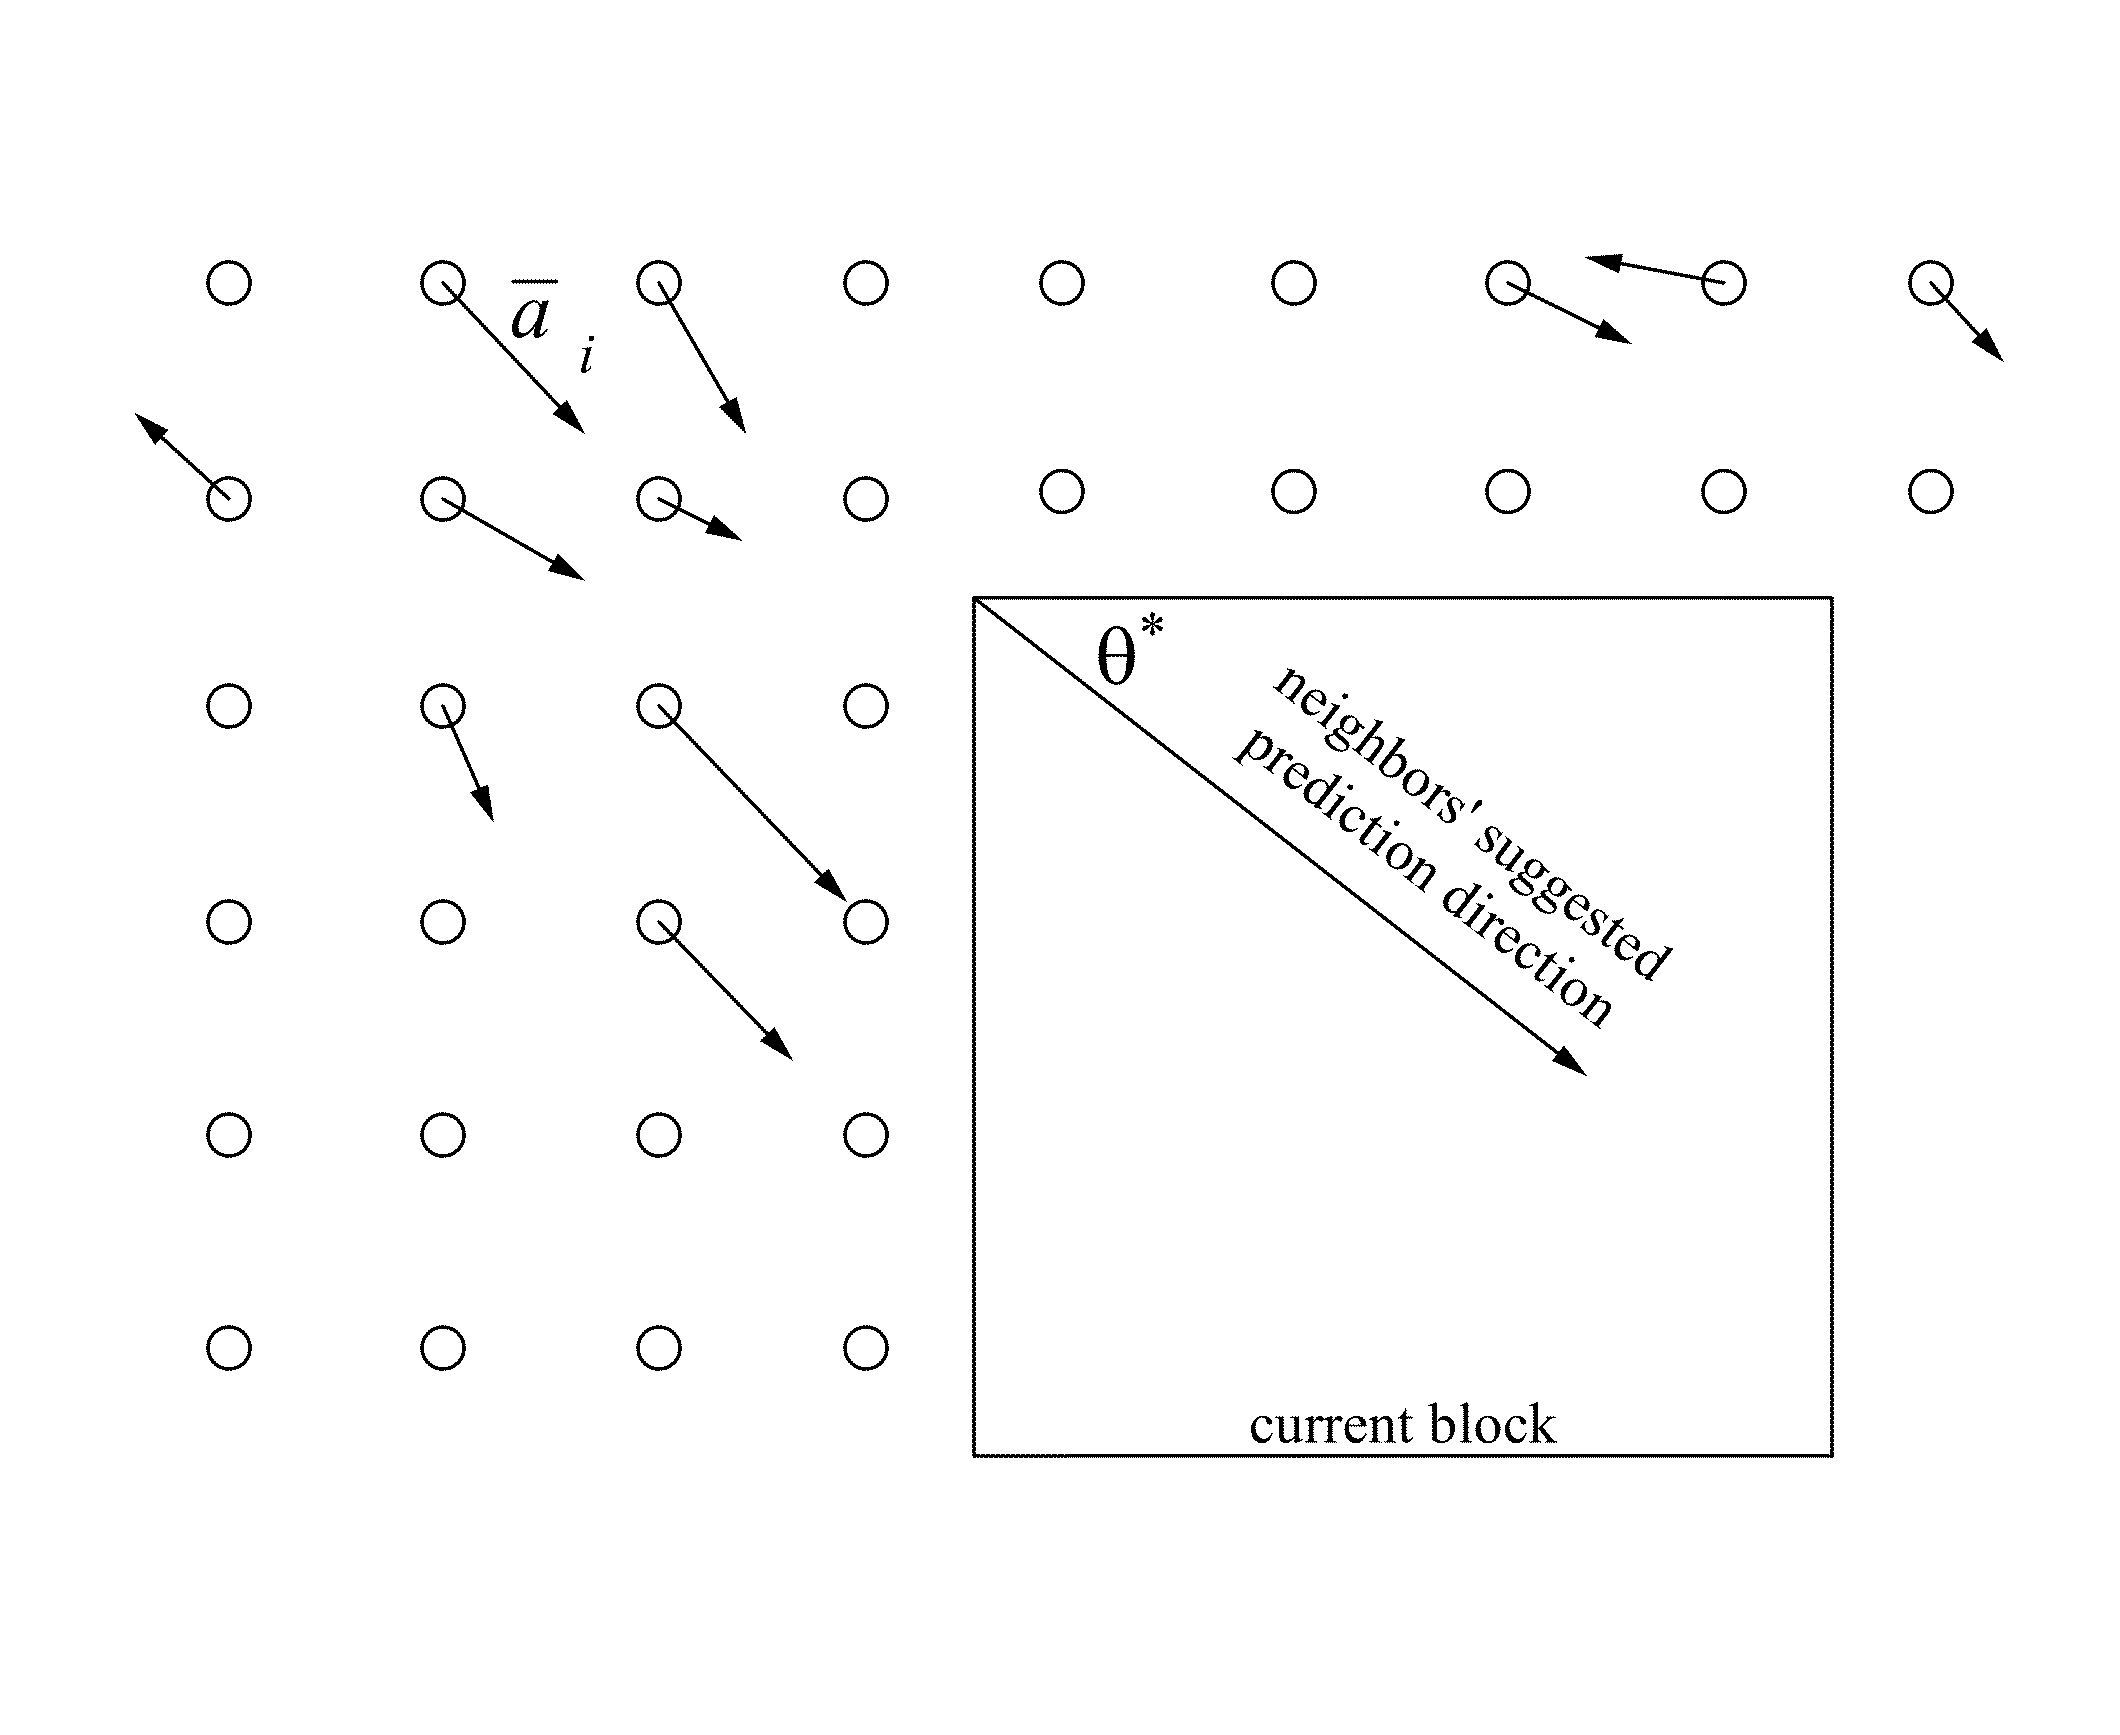 Differential coding of intra directions (DCIC)